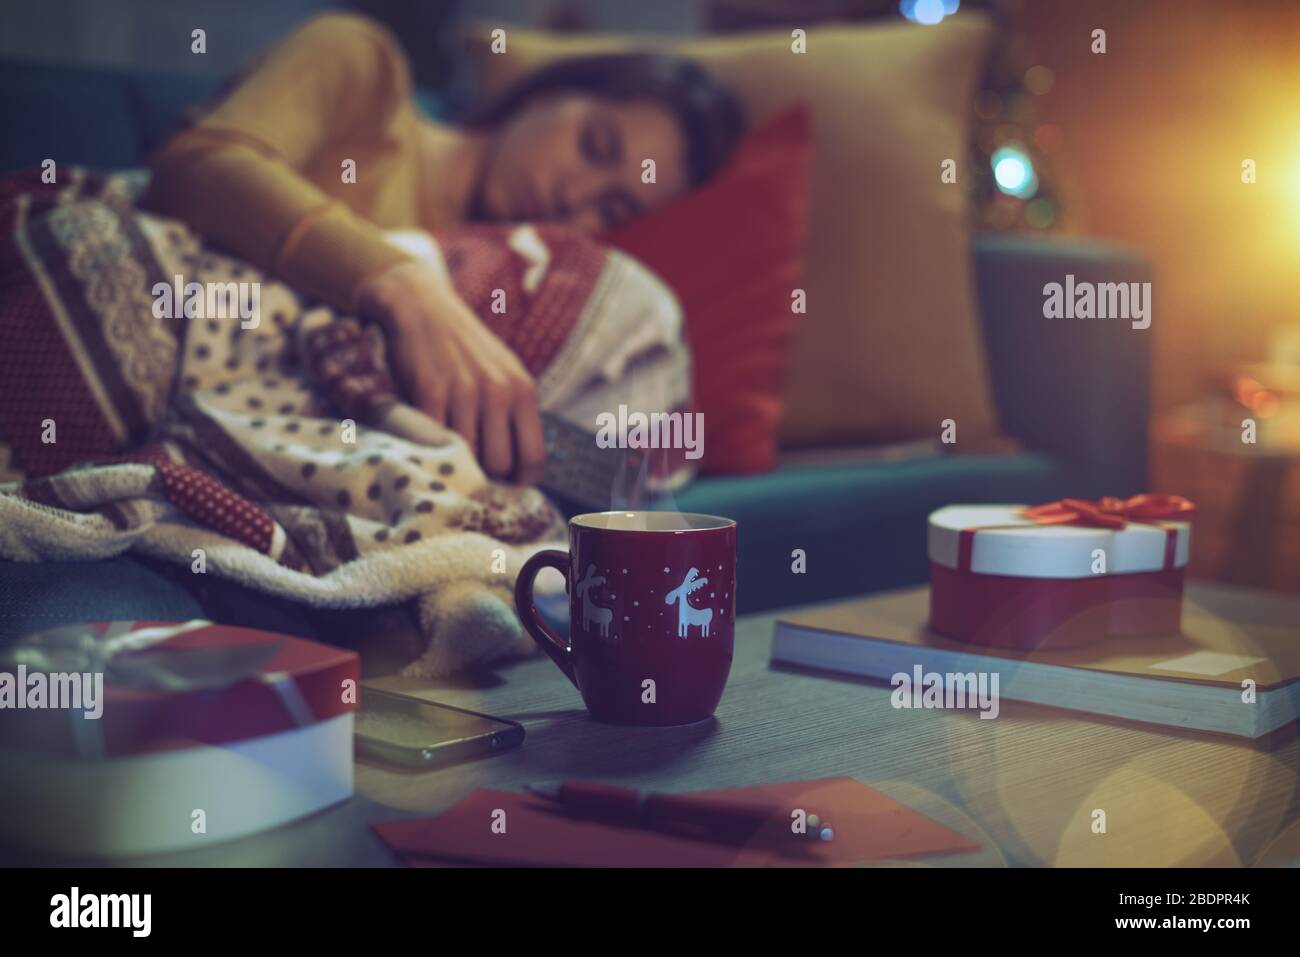 Young woman lying down on the sofa and falling asleep on Christmas Eve, she is holding the TV remote control, gifts in the foreground Stock Photo